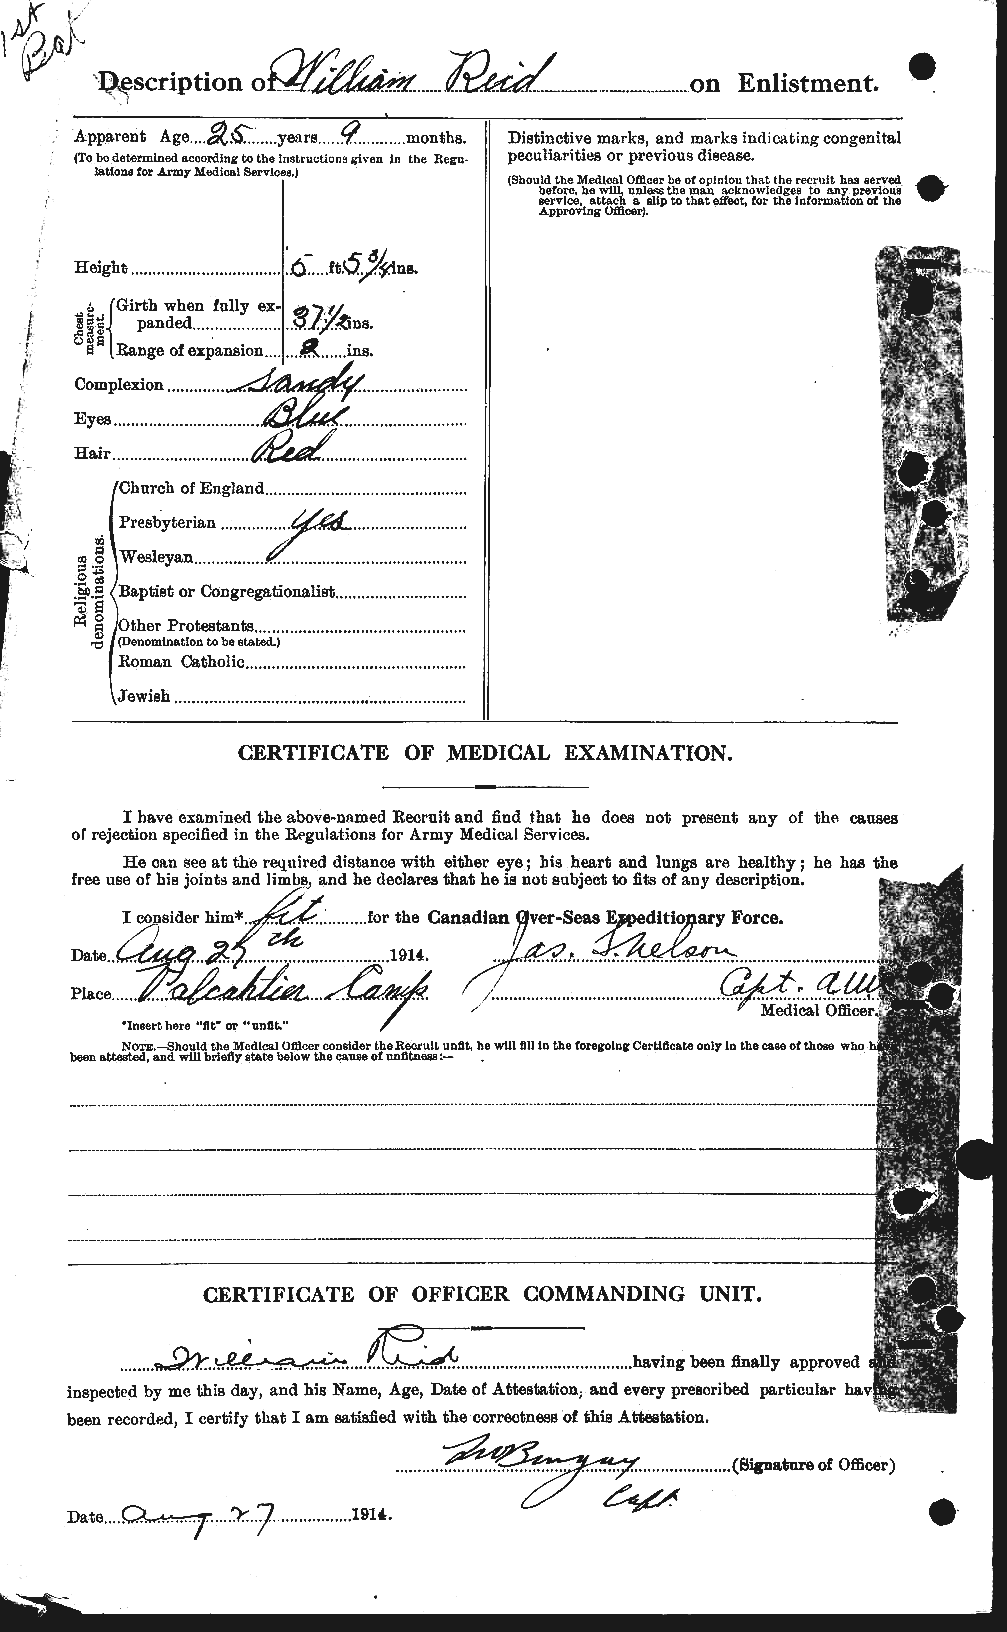 Personnel Records of the First World War - CEF 596933b